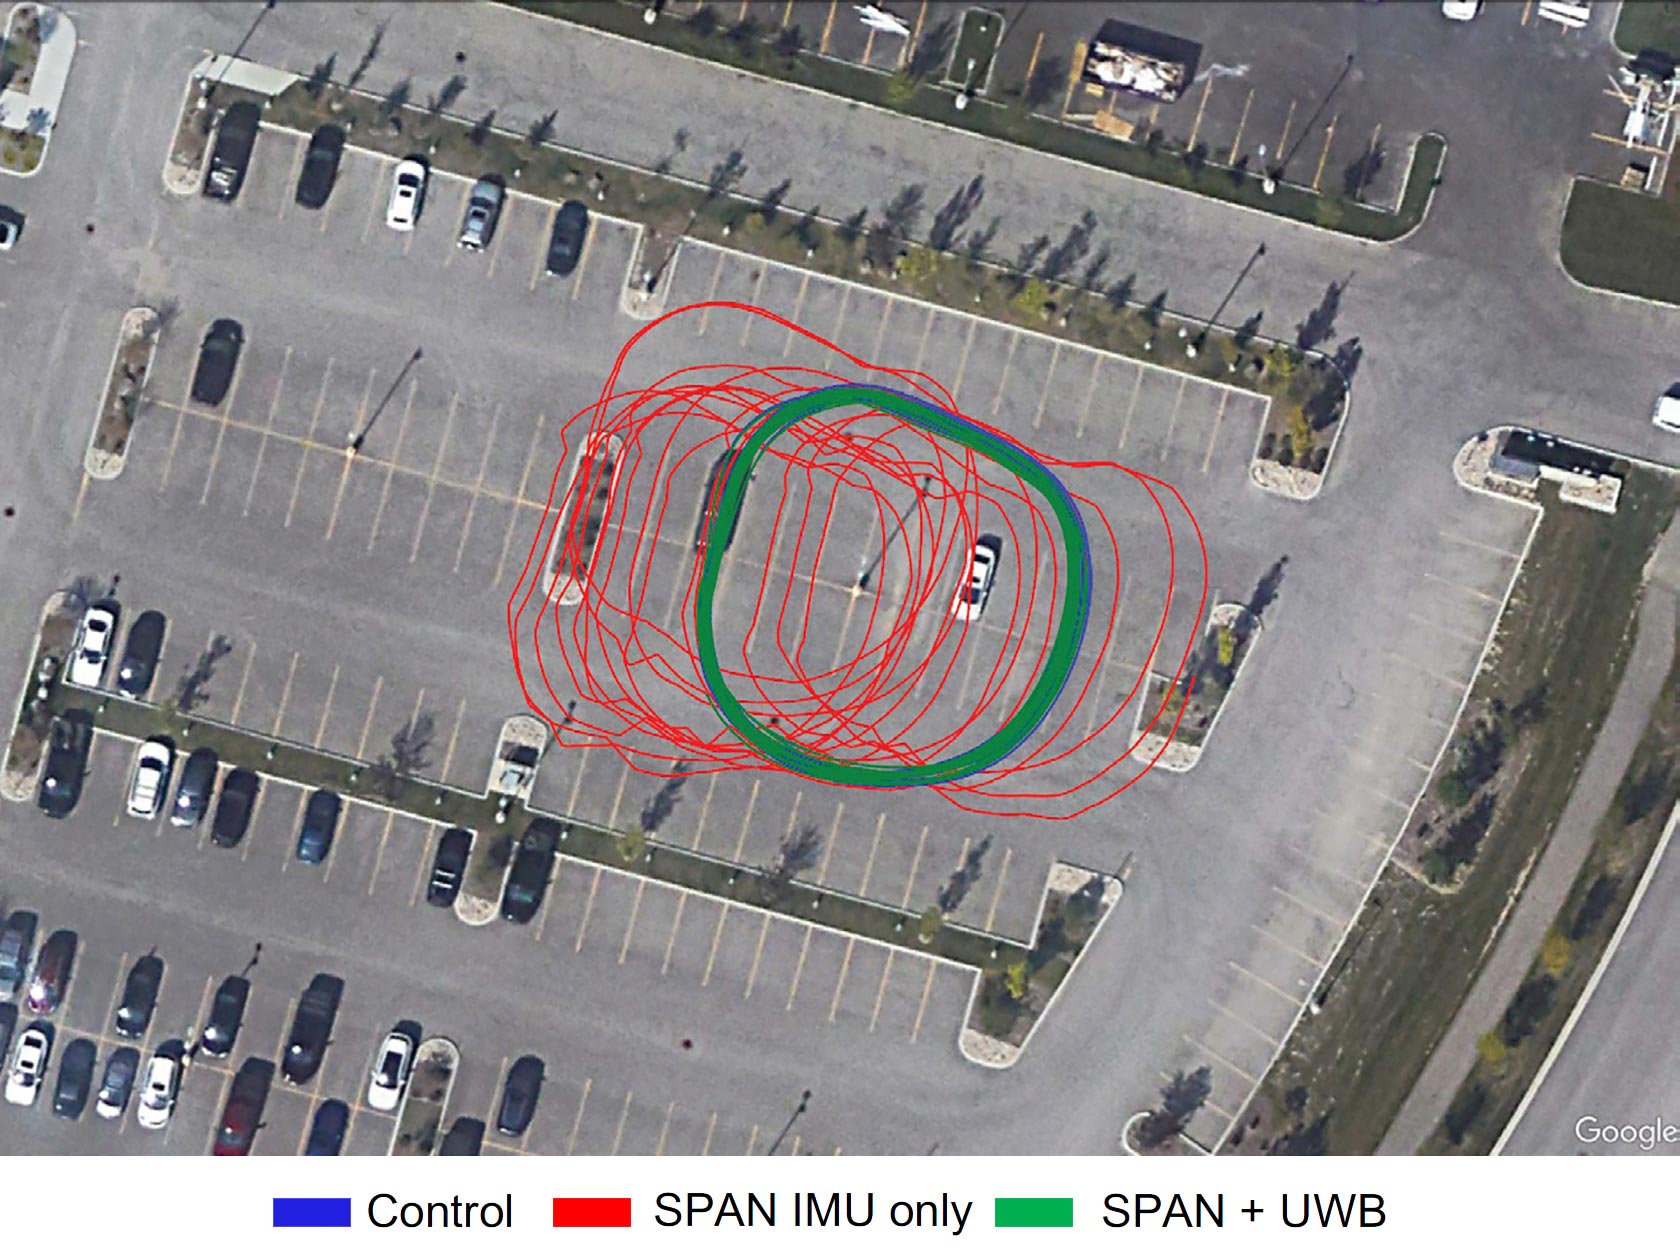 Overhead view of parking lot with paths circled